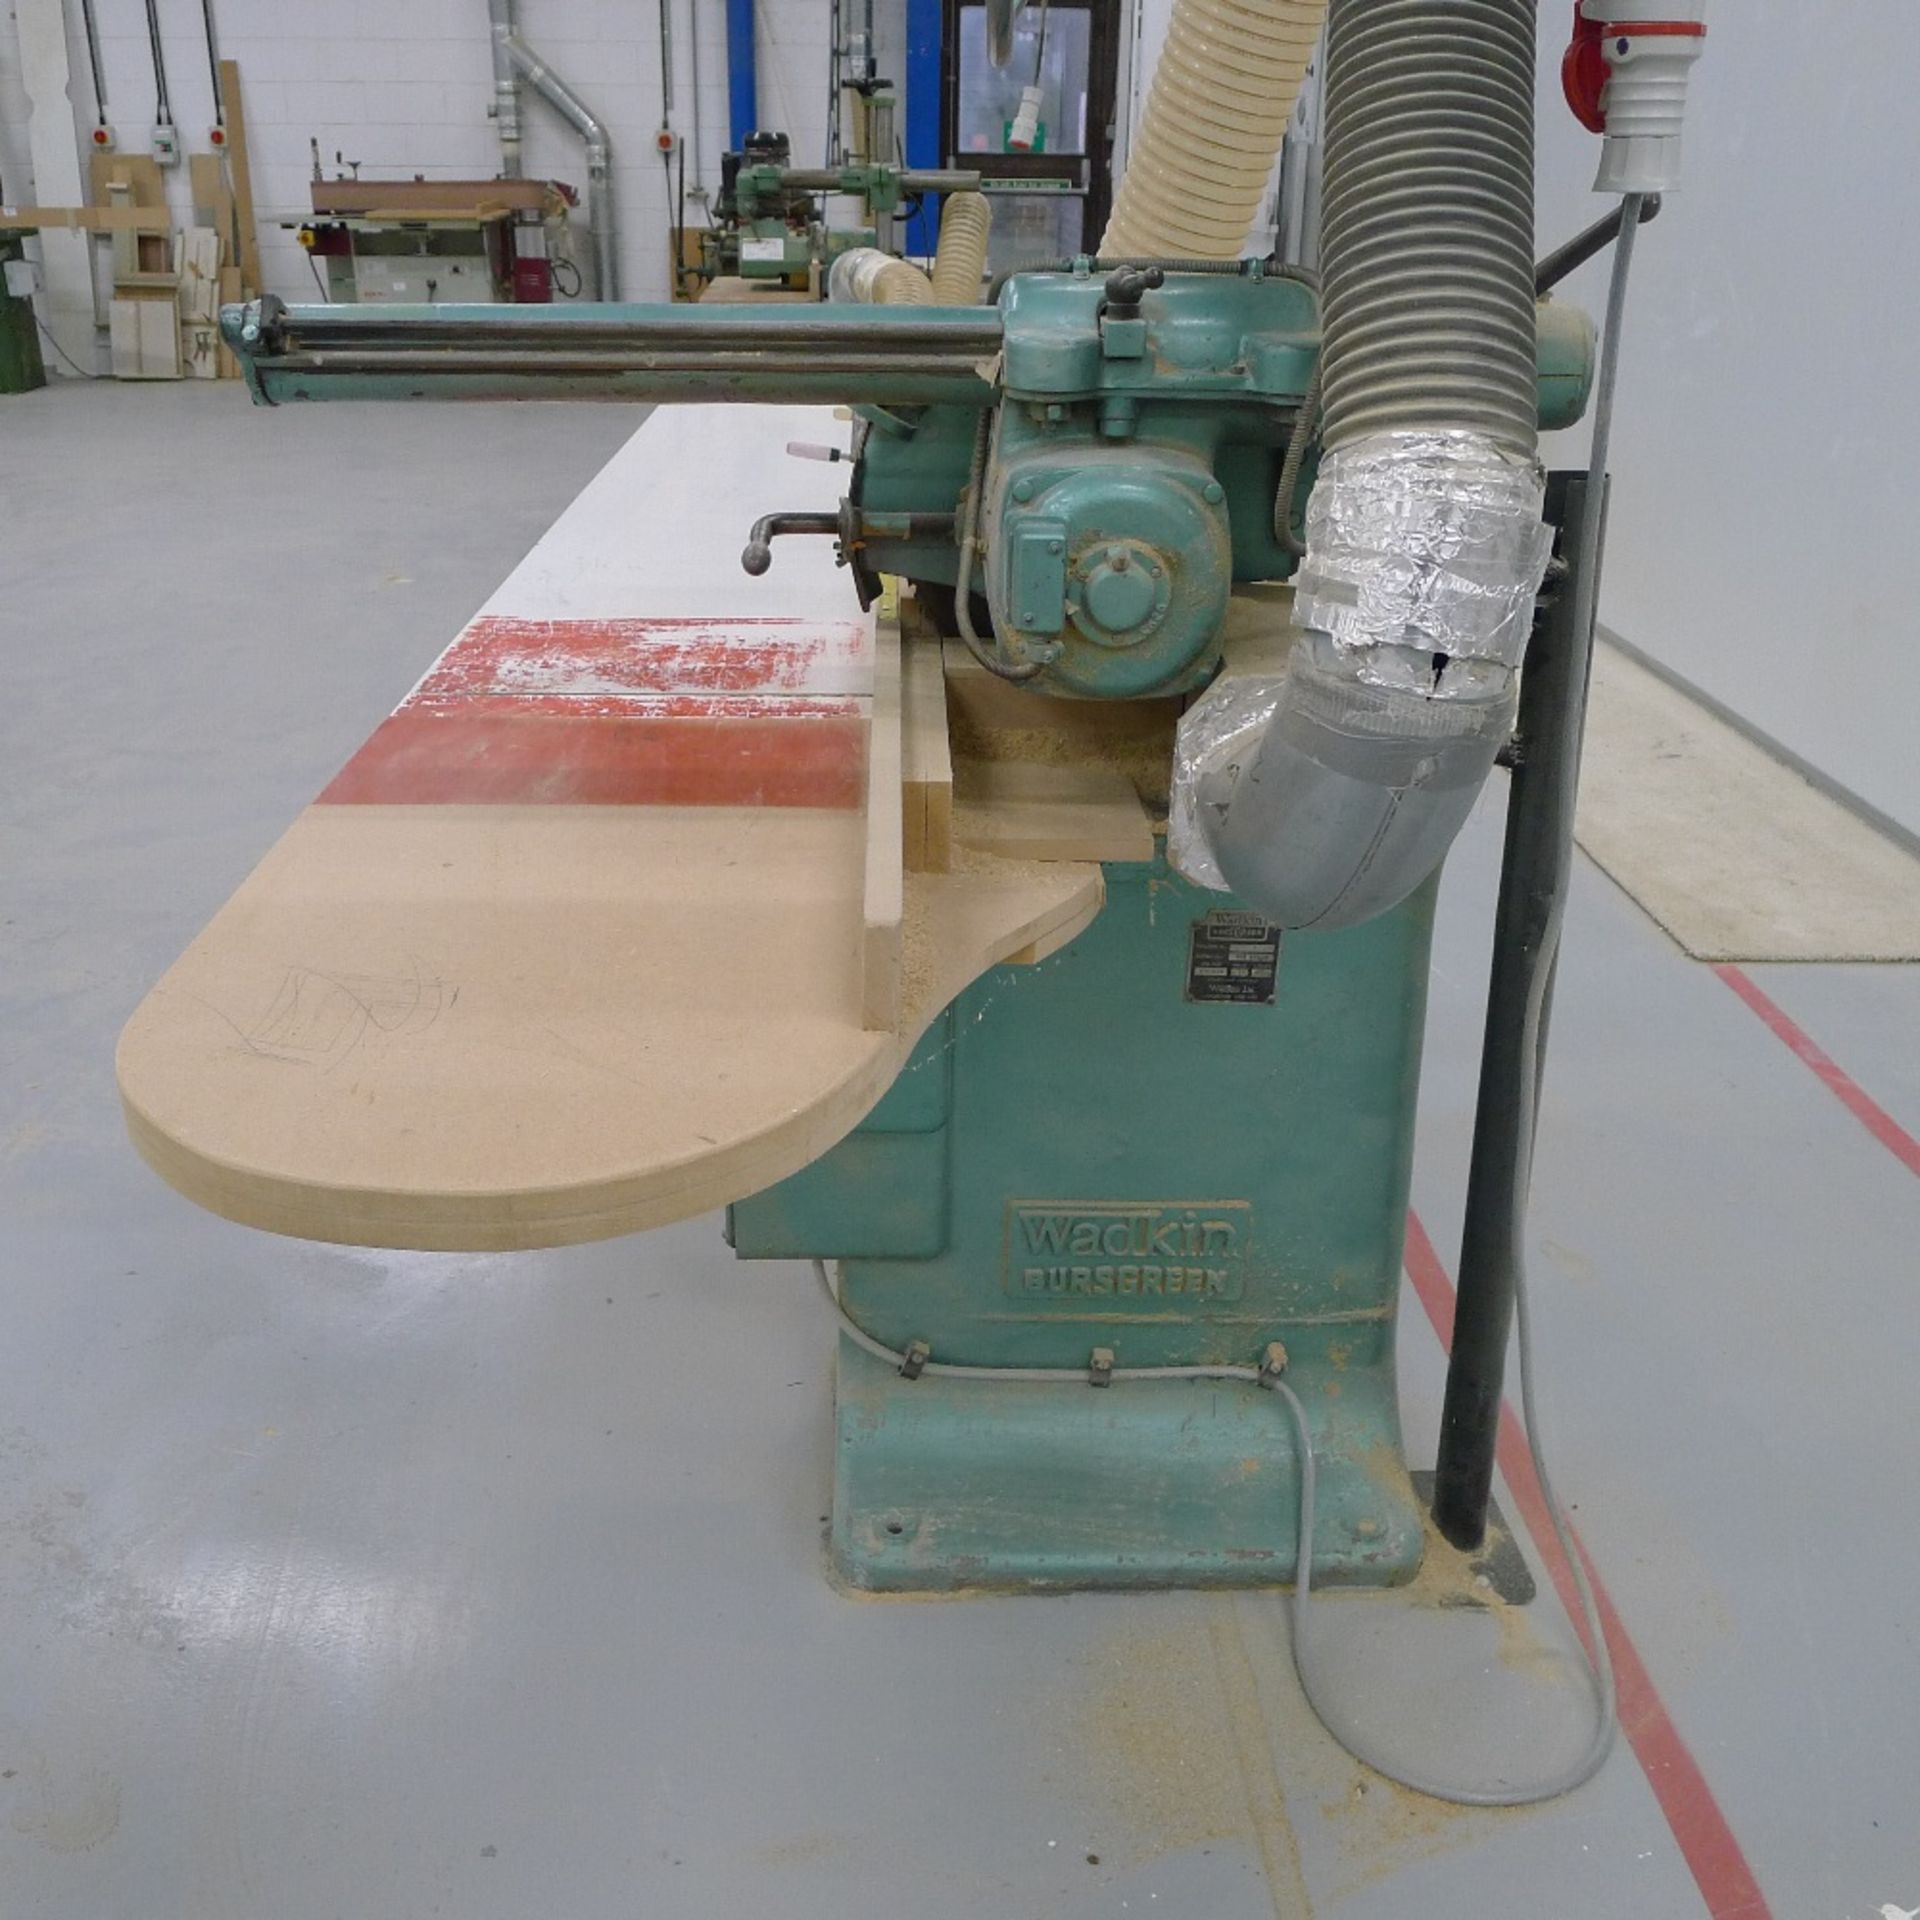 1 radial arm cross cut saw by Wadkin Bursgreen type BCK, s/n 57226, 3ph. The support table fitted to - Image 2 of 5